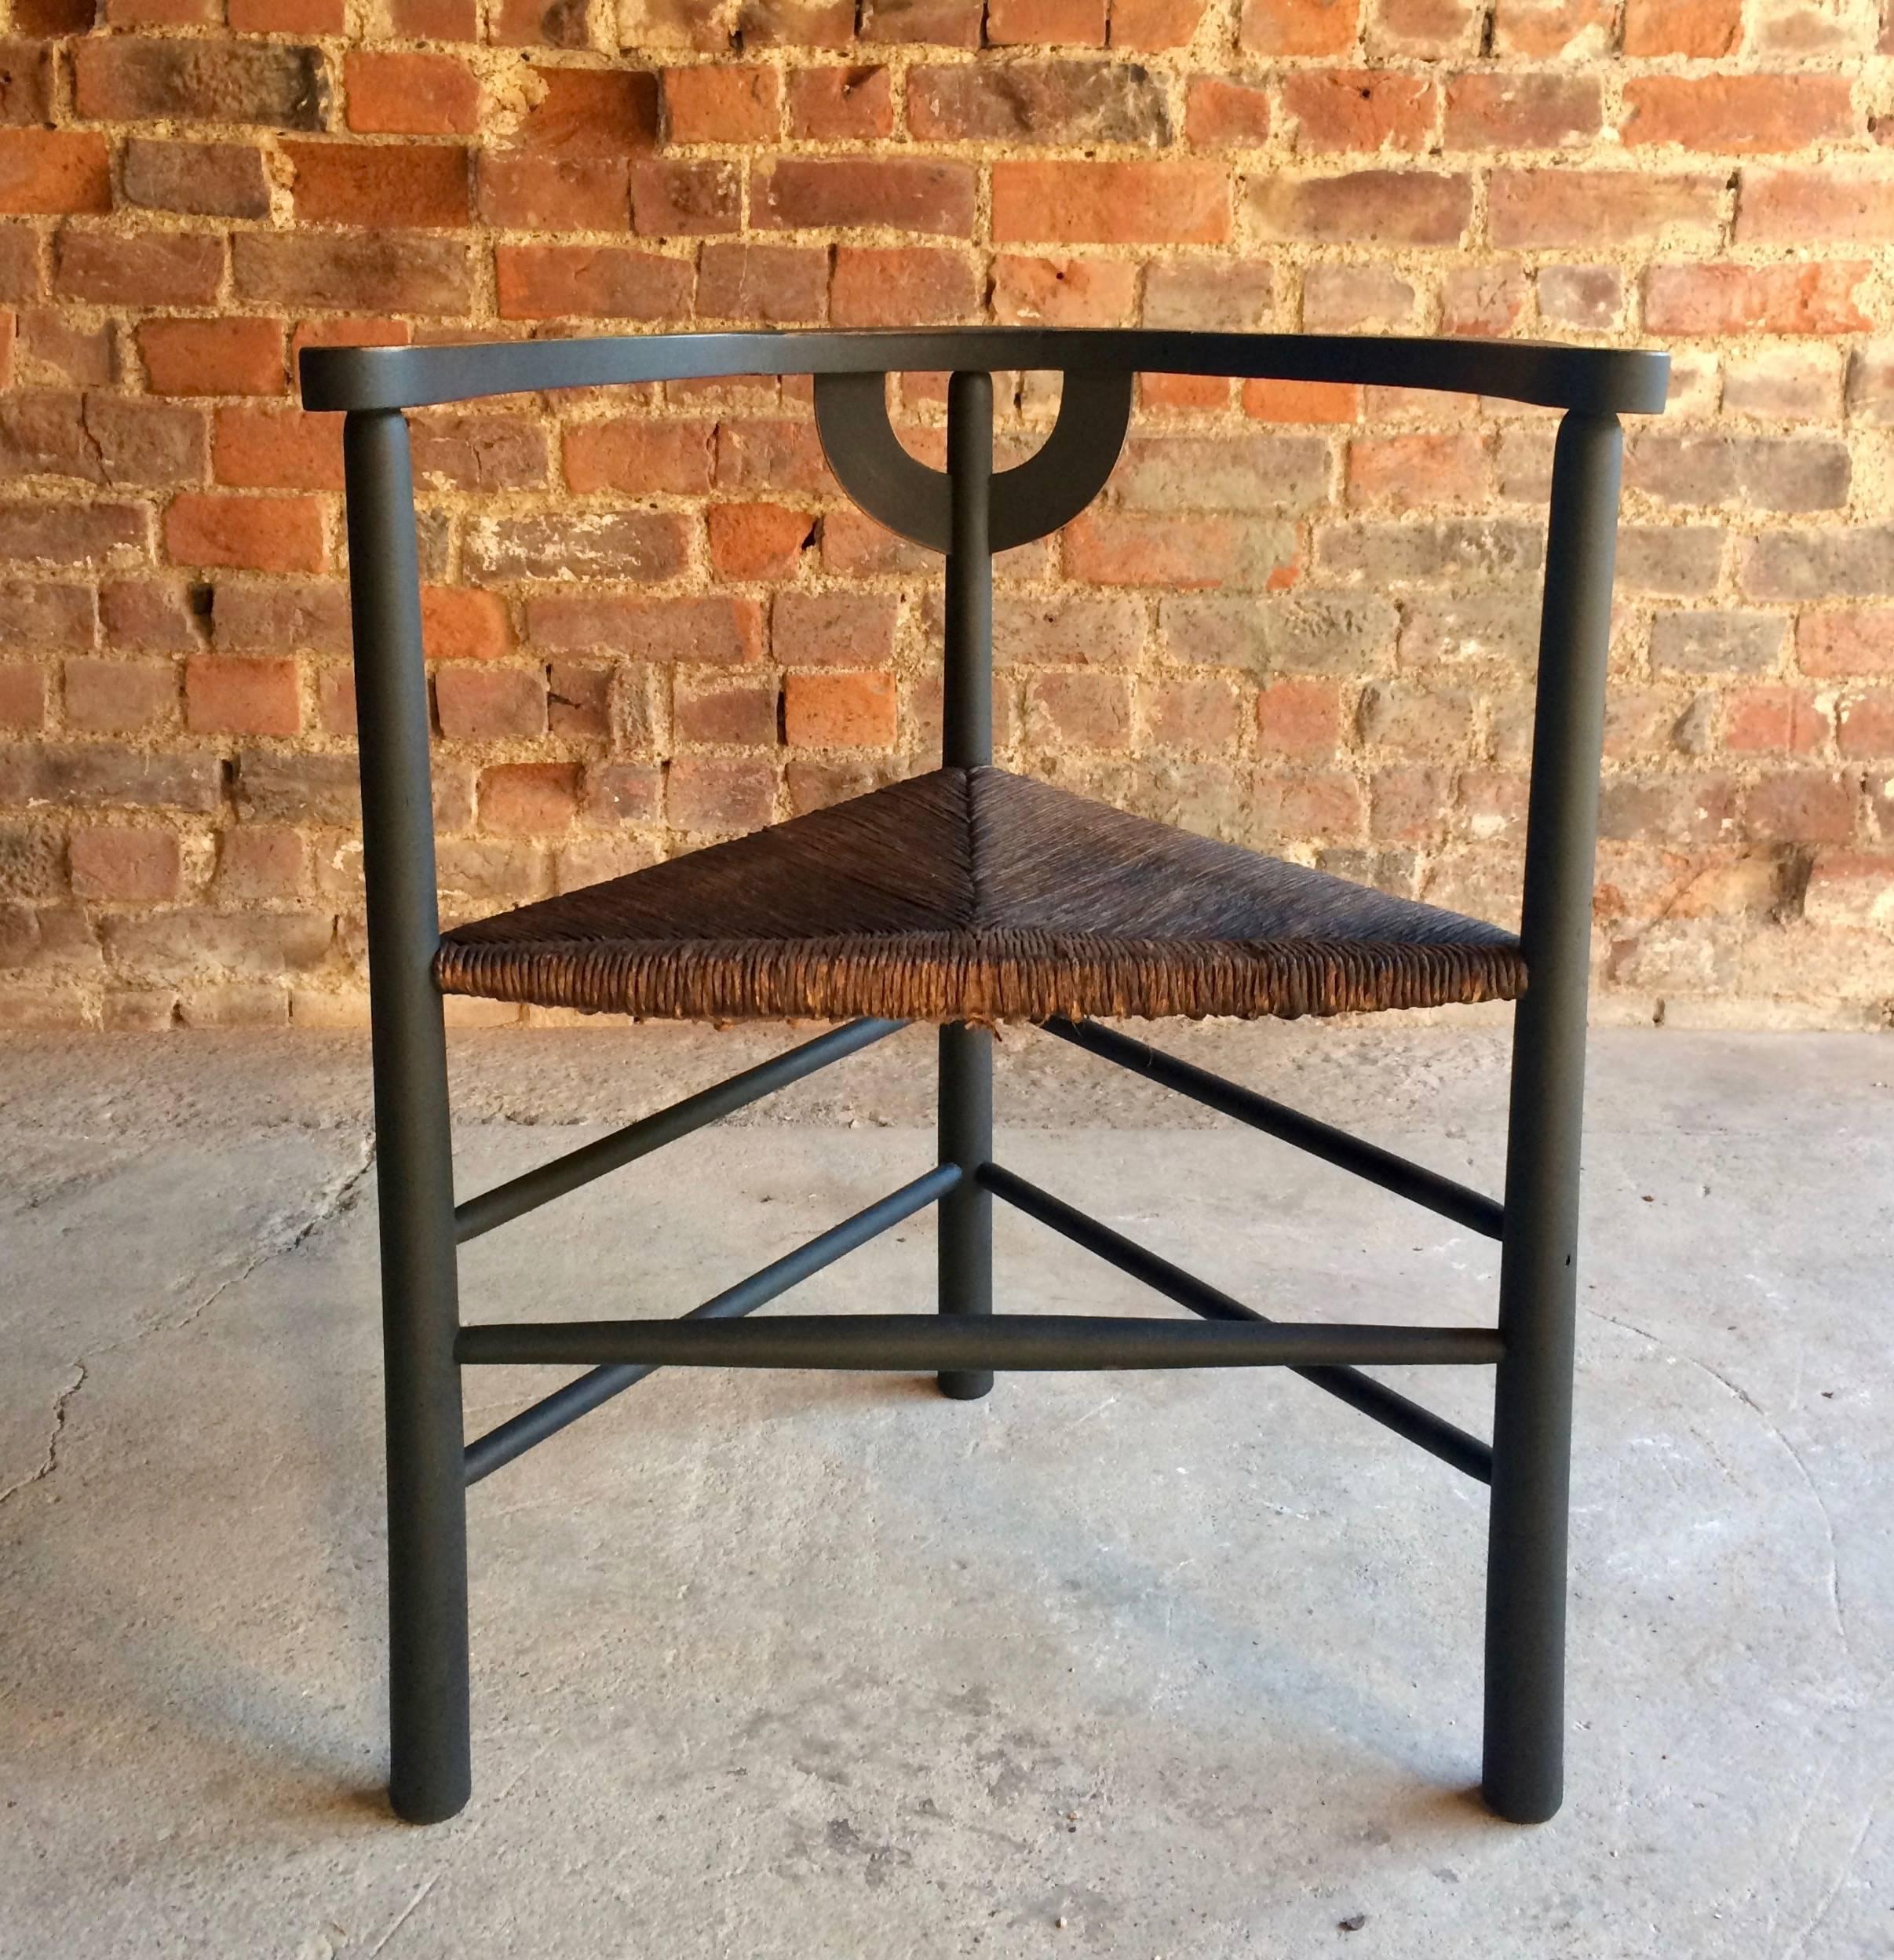 A late 19th century Aesthetic Movement rush seated ebonized chair with three legs.

Antique
Chair
Rush seat
Ebonized
Investment
Practical and beautiful 

Dimensions:

Height 28” inches (floor to seat 17” inches)

Width 23”